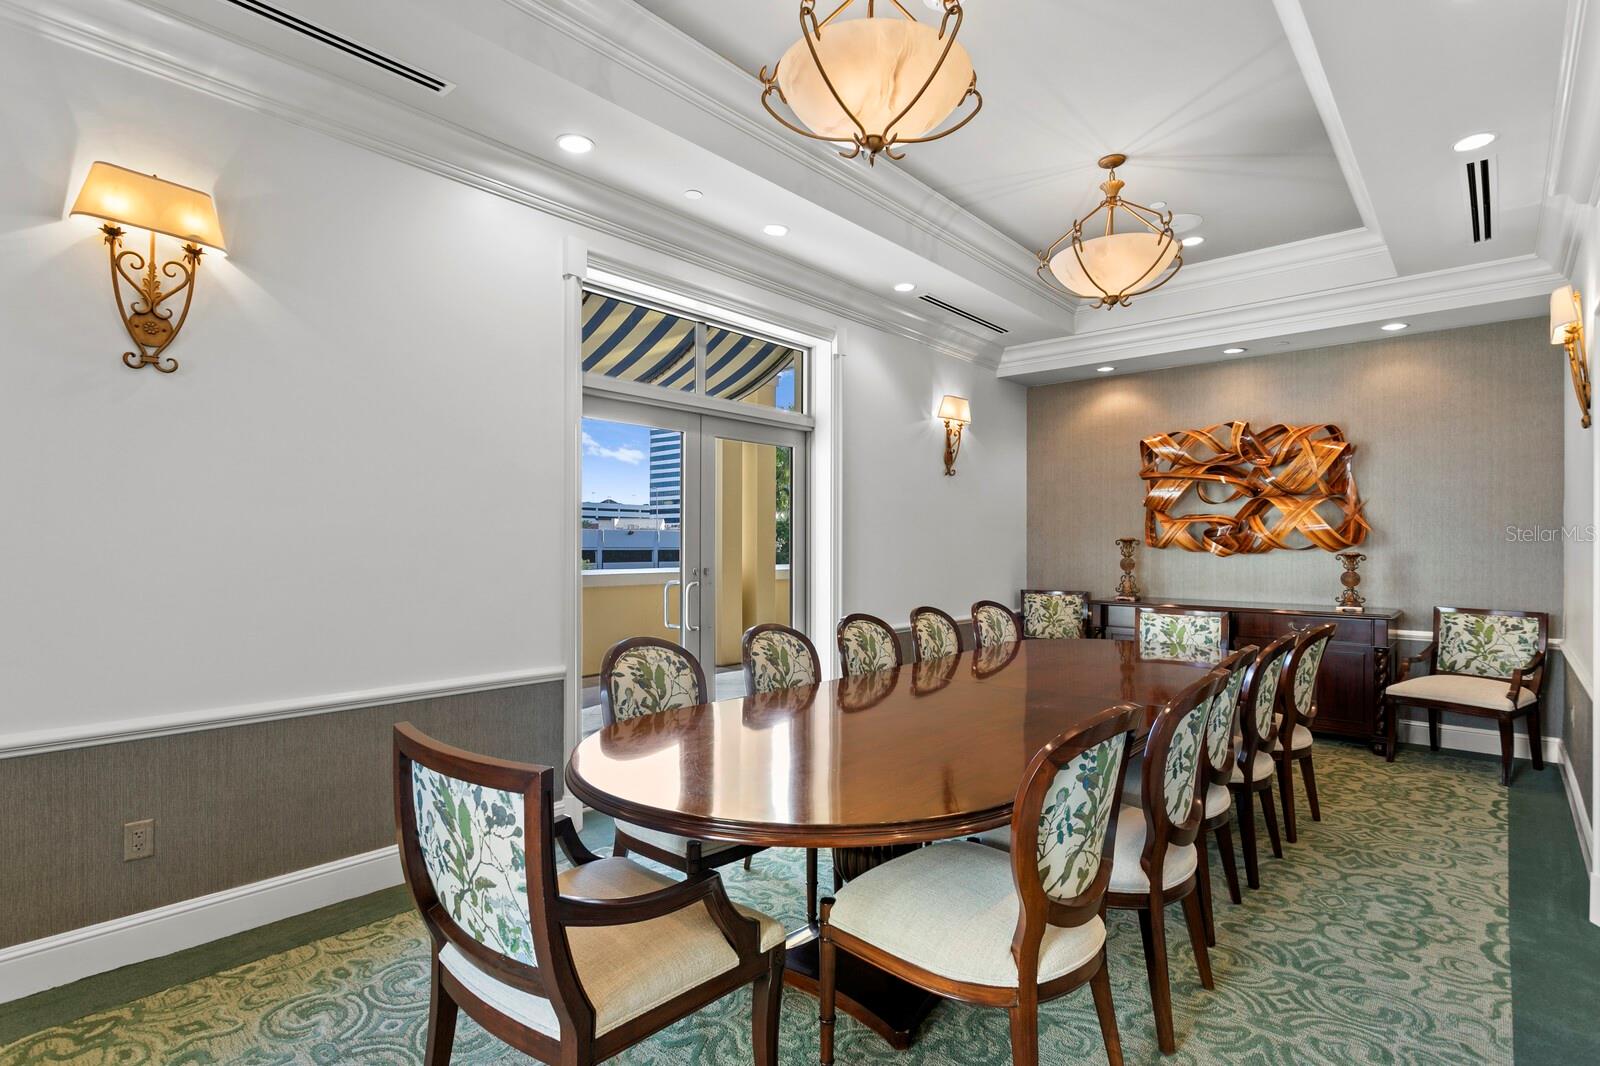 Another neat amenity in Parkshore is this private dining area that can seat 12. Hire your local favorite restaurant to cater your next intimate dinner party!